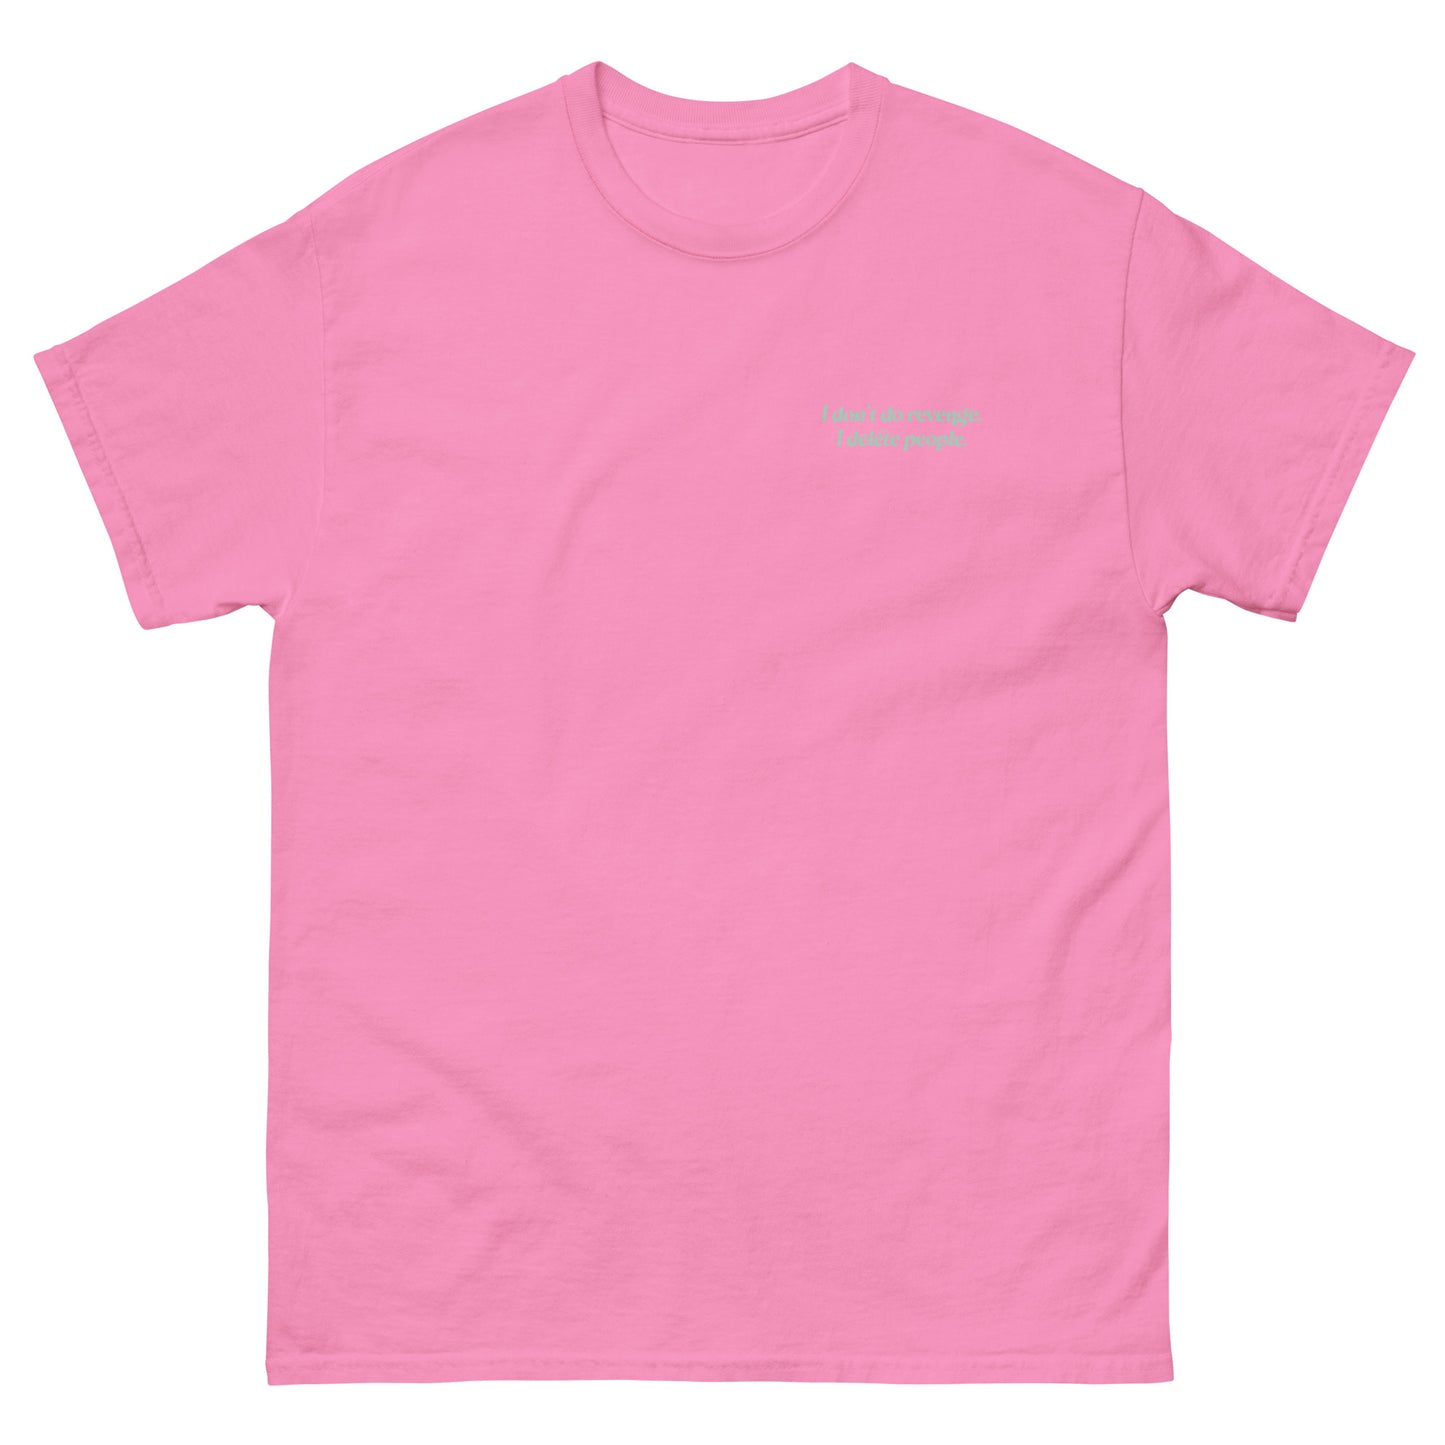 Pink High Quality Tee - Front Design with "I don't do revenge, I delete people. " print on left chest - Back Design with a Phrase "I don't do revenge, I delete people." print